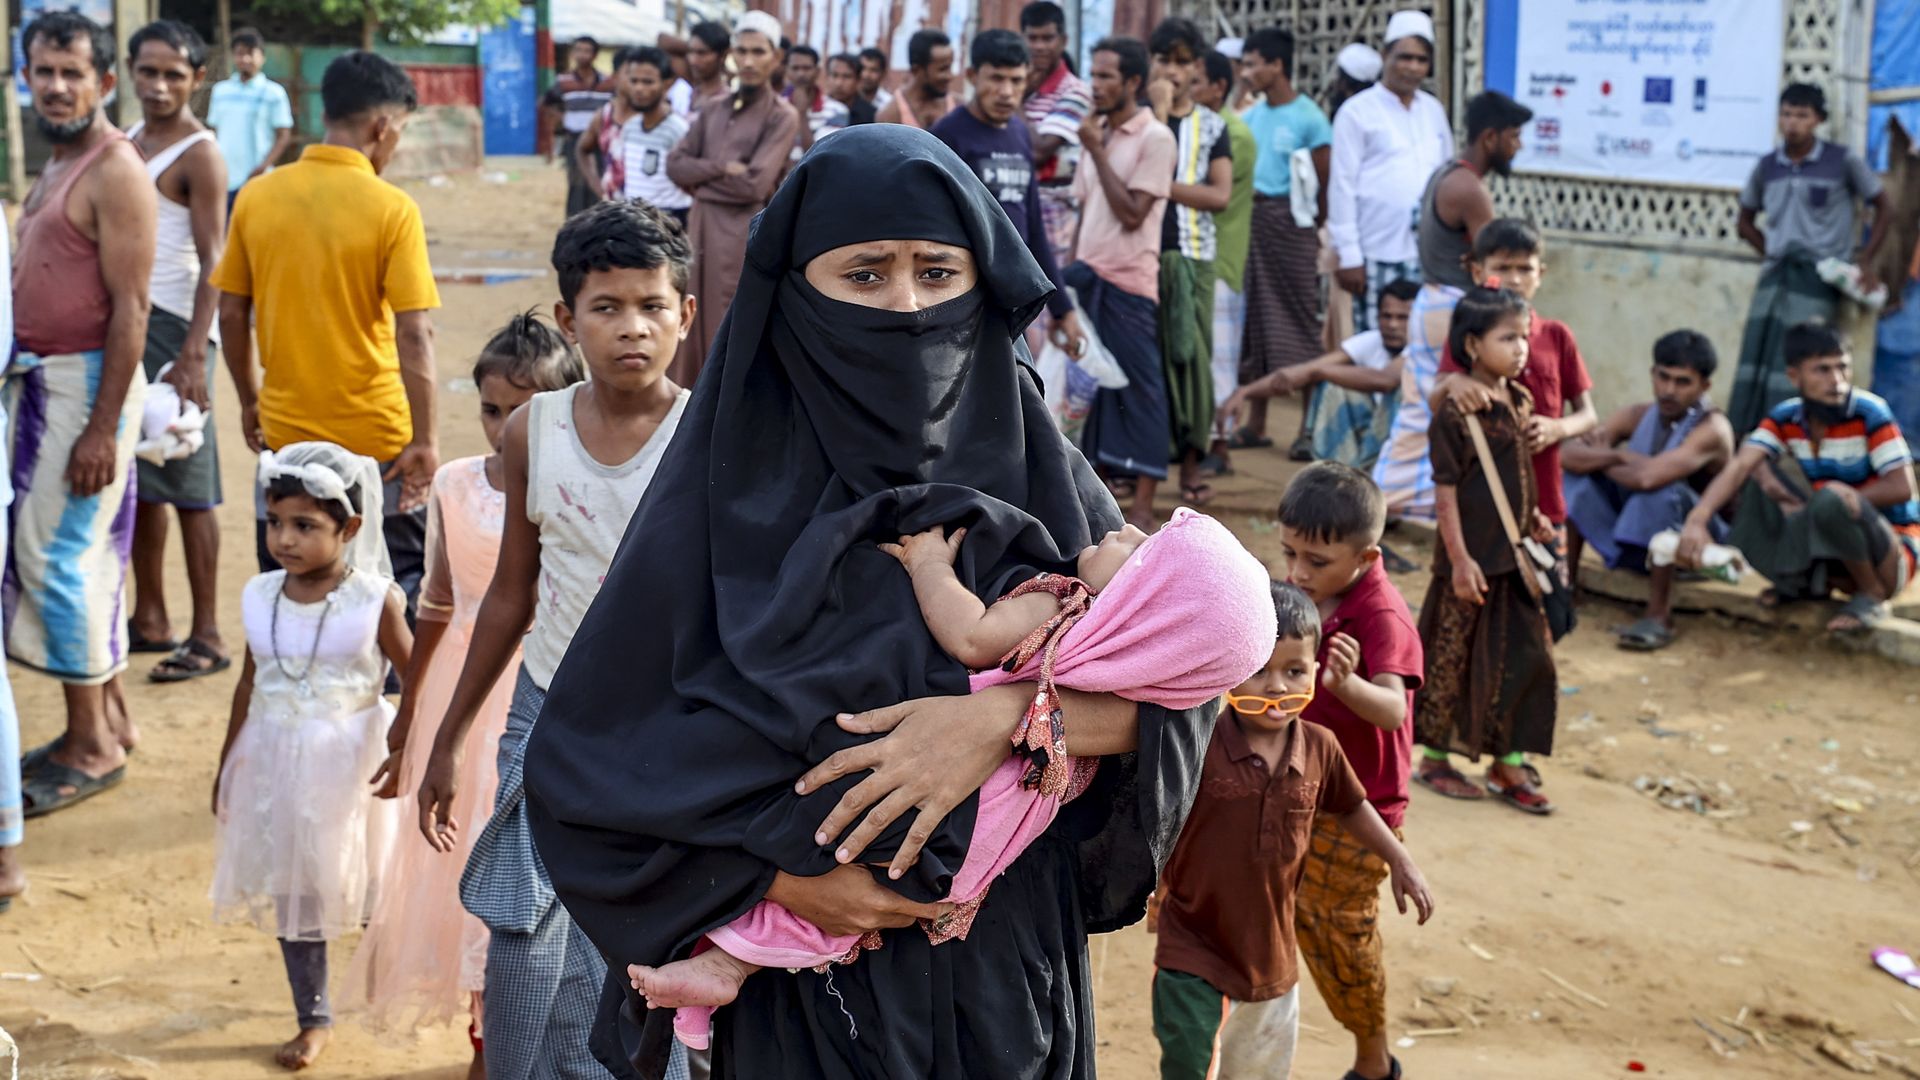 Rohingya Muslims in a refugee camp in Bangladesh on July 10.